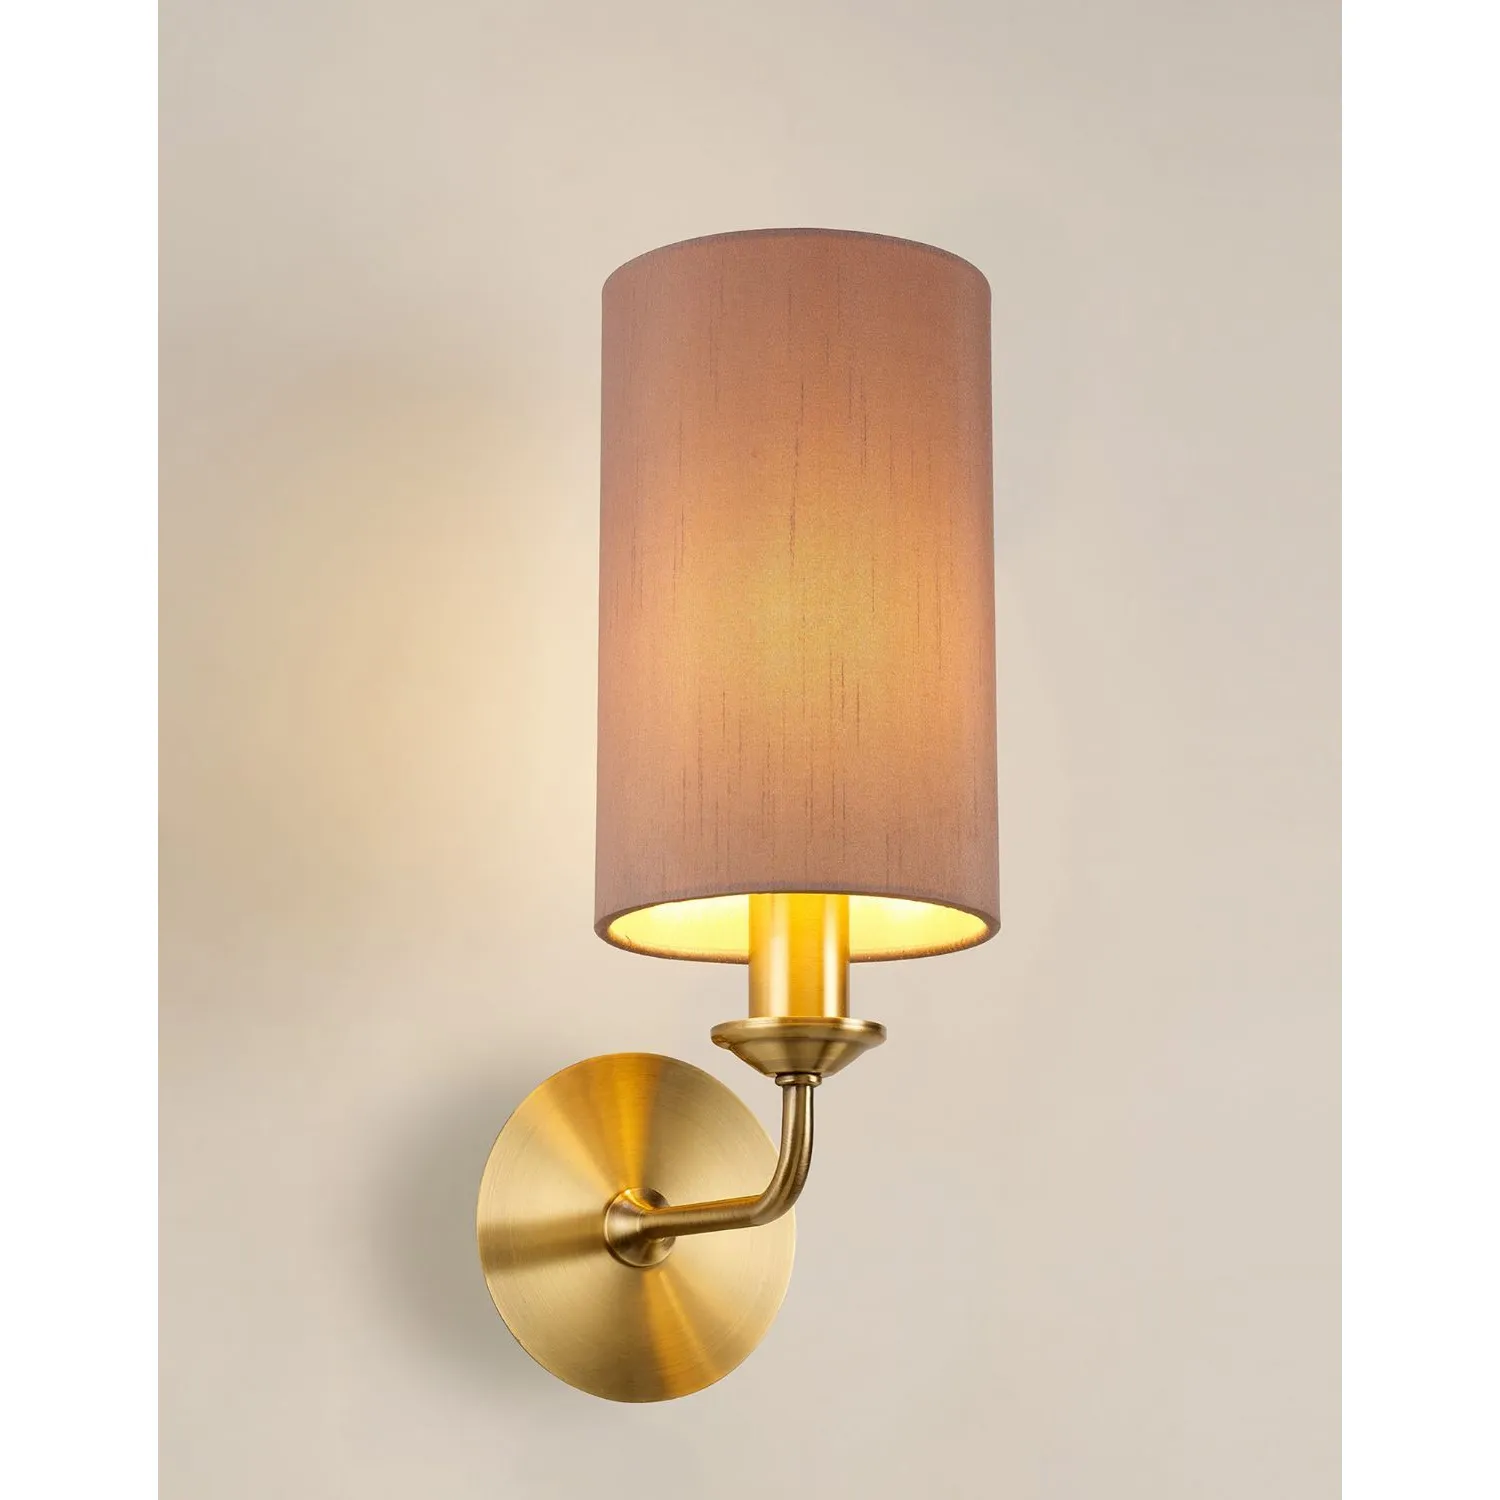 Banyan 1 Light Switched Wall Lamp, E14 Antique Brass c w 120mm Dual Faux Silk Shade, Taupe Halo Gold